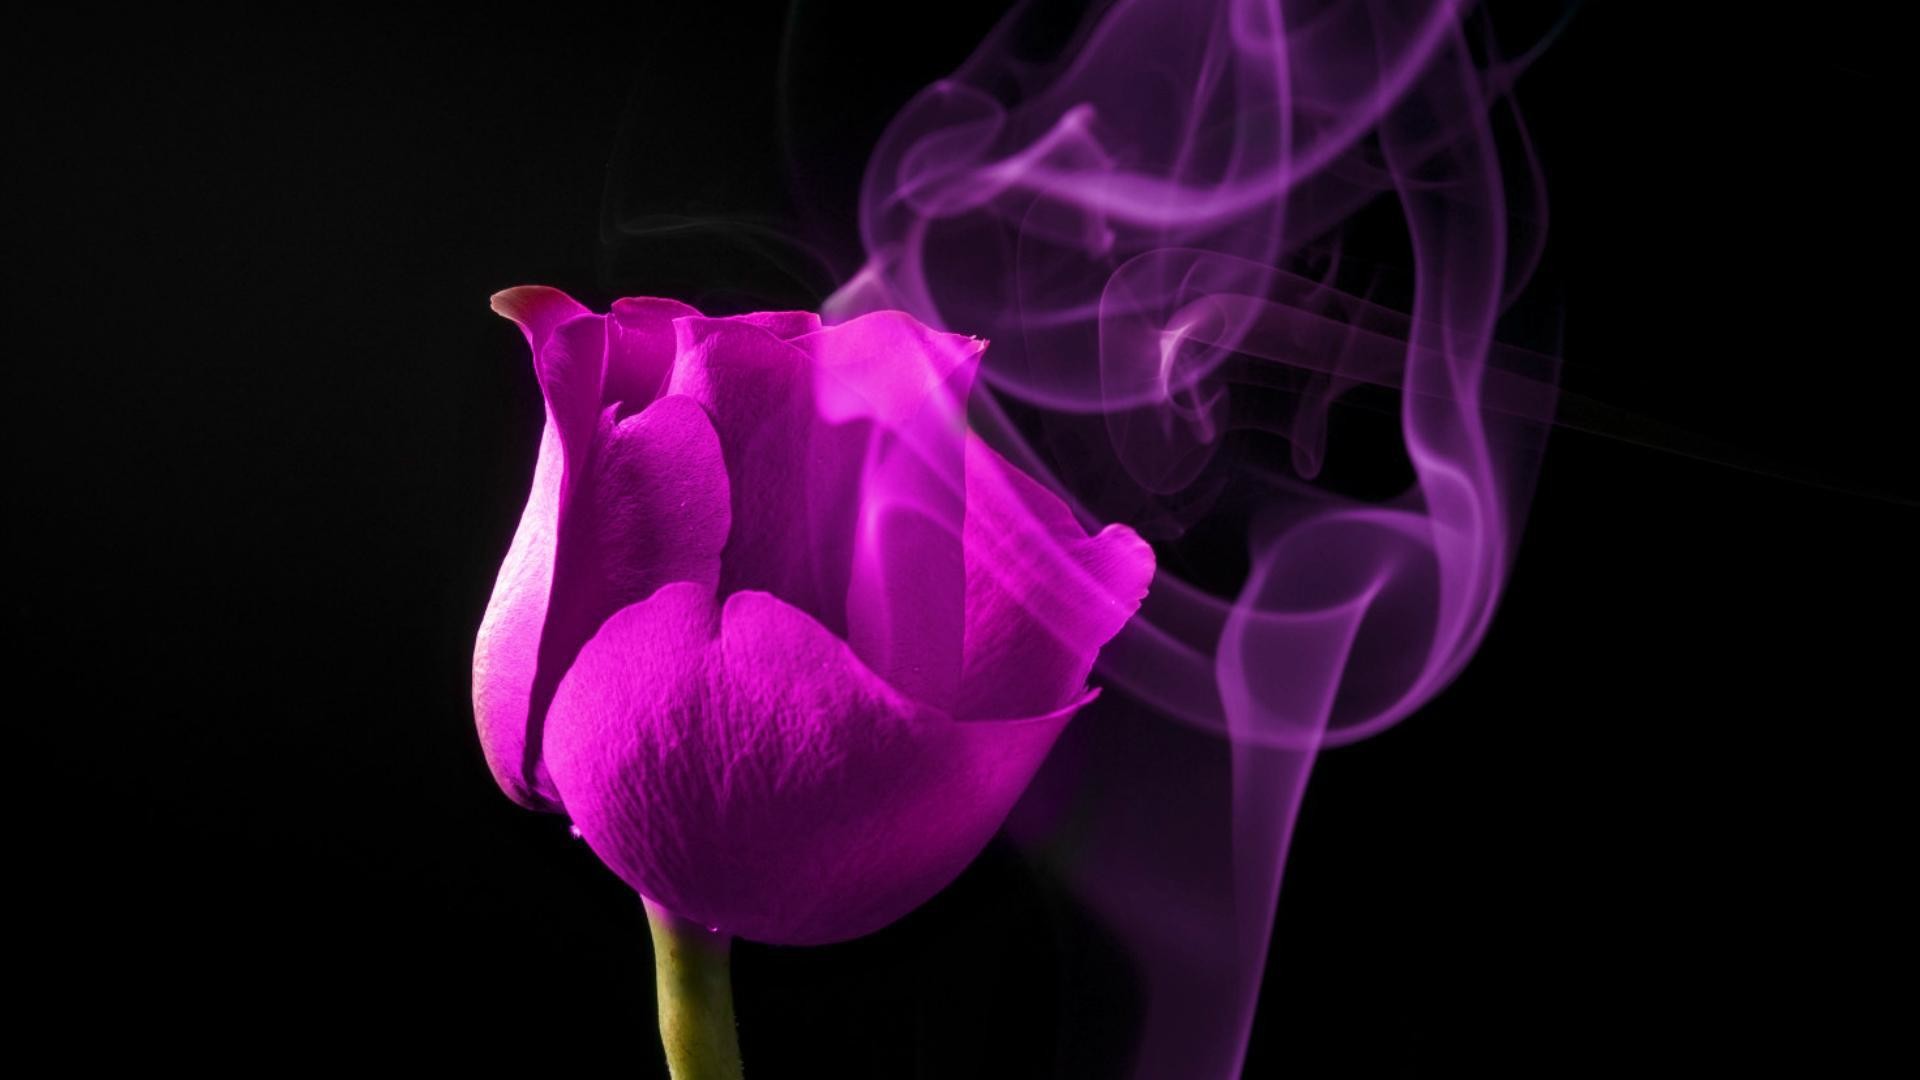 1920x1080 purple rose on a black background wallpapers and images wallpapers 